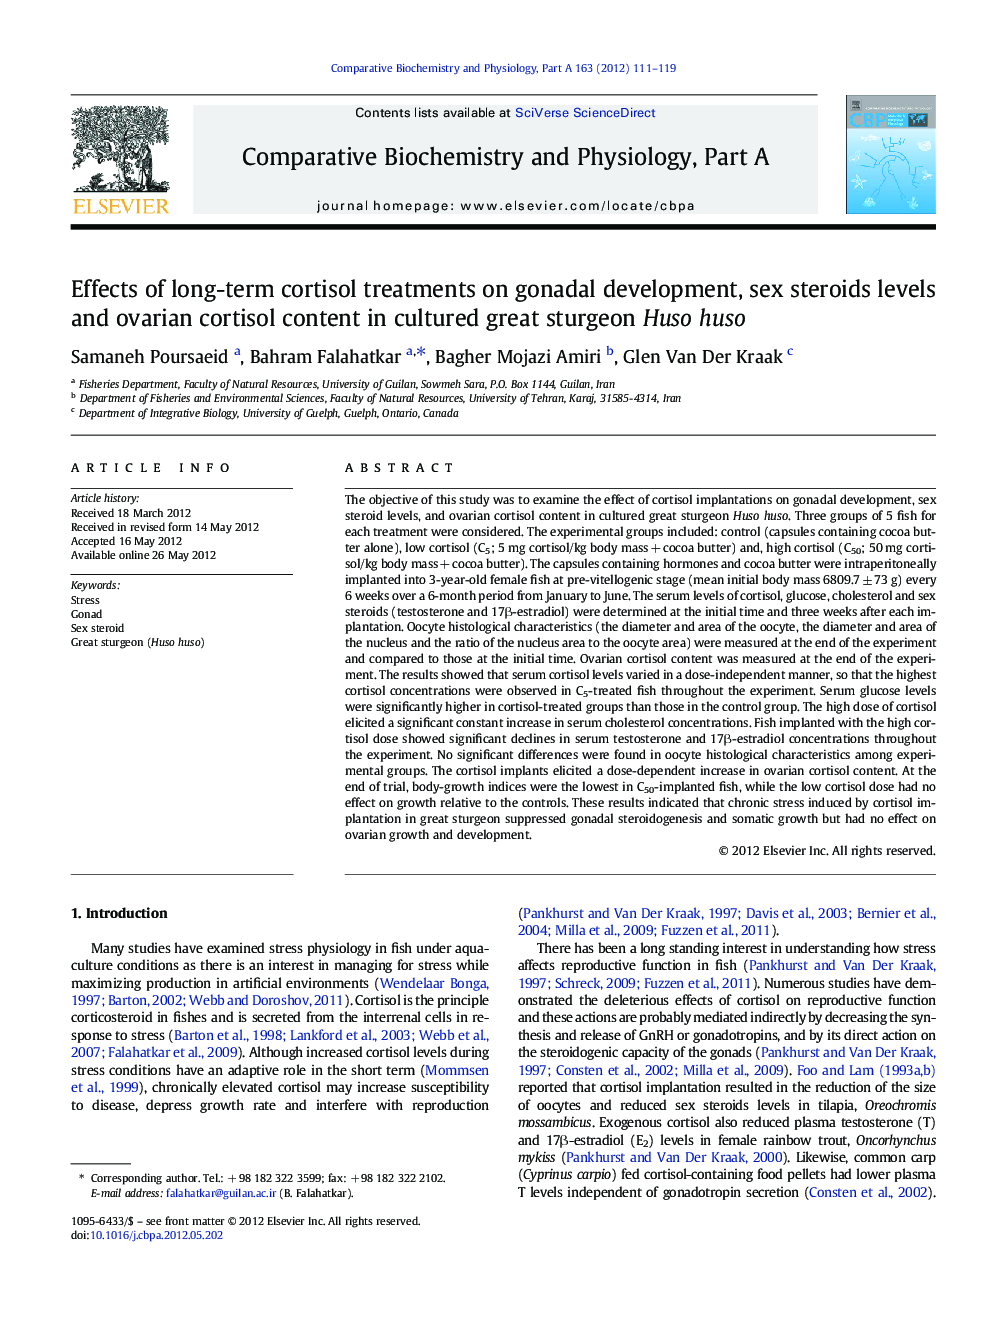 Effects of long-term cortisol treatments on gonadal development, sex steroids levels and ovarian cortisol content in cultured great sturgeon Huso huso